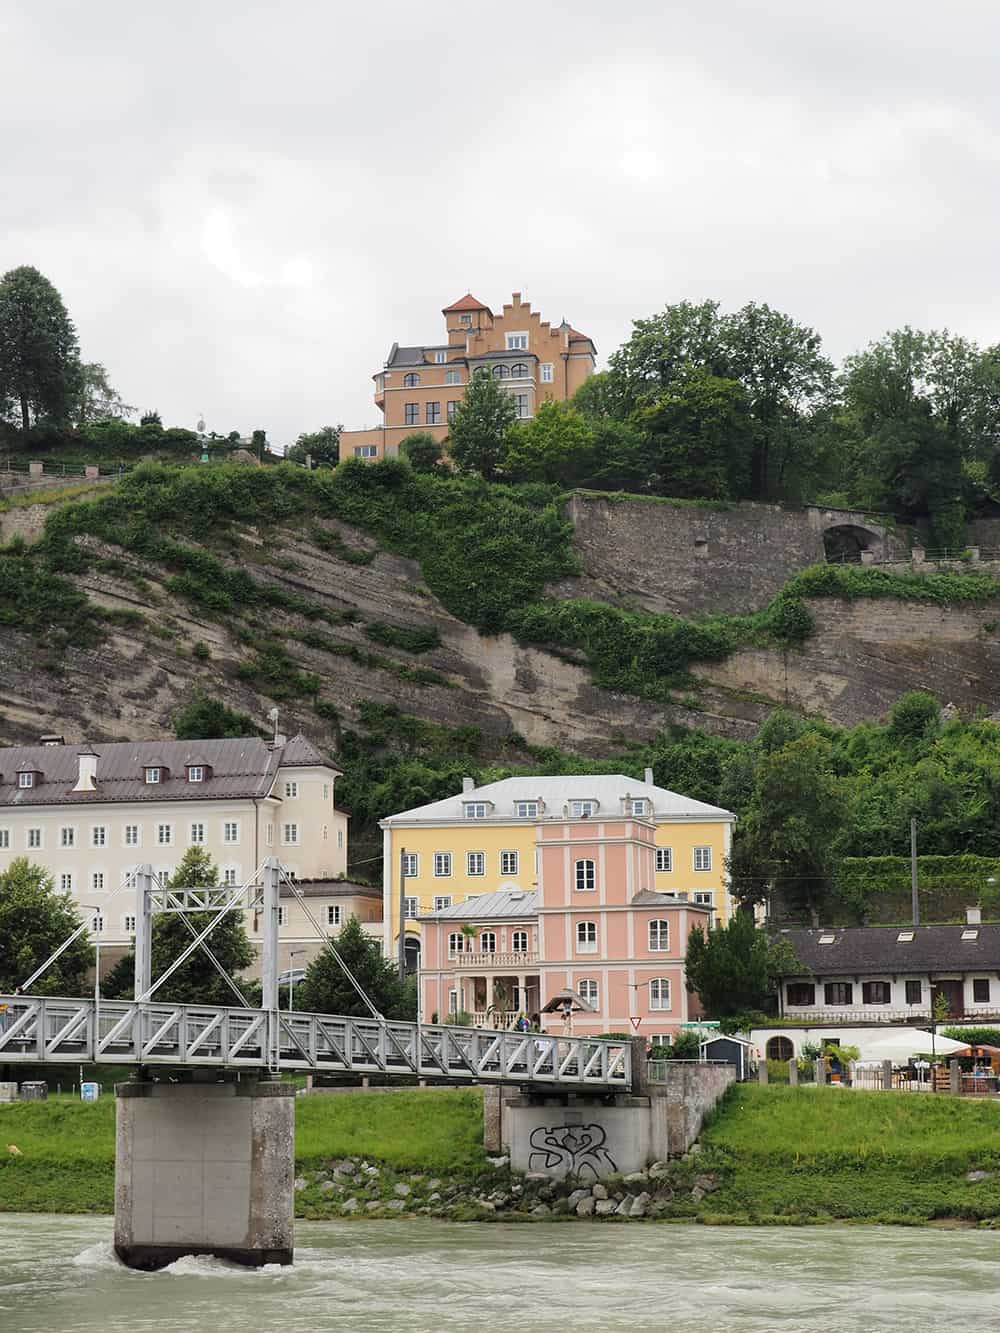 Salzburg, Austria is a beautiful city that is so walk able. We were able to spend our whole time with only using one type of transportation- a mountainside funicular. | via Autumn All Along